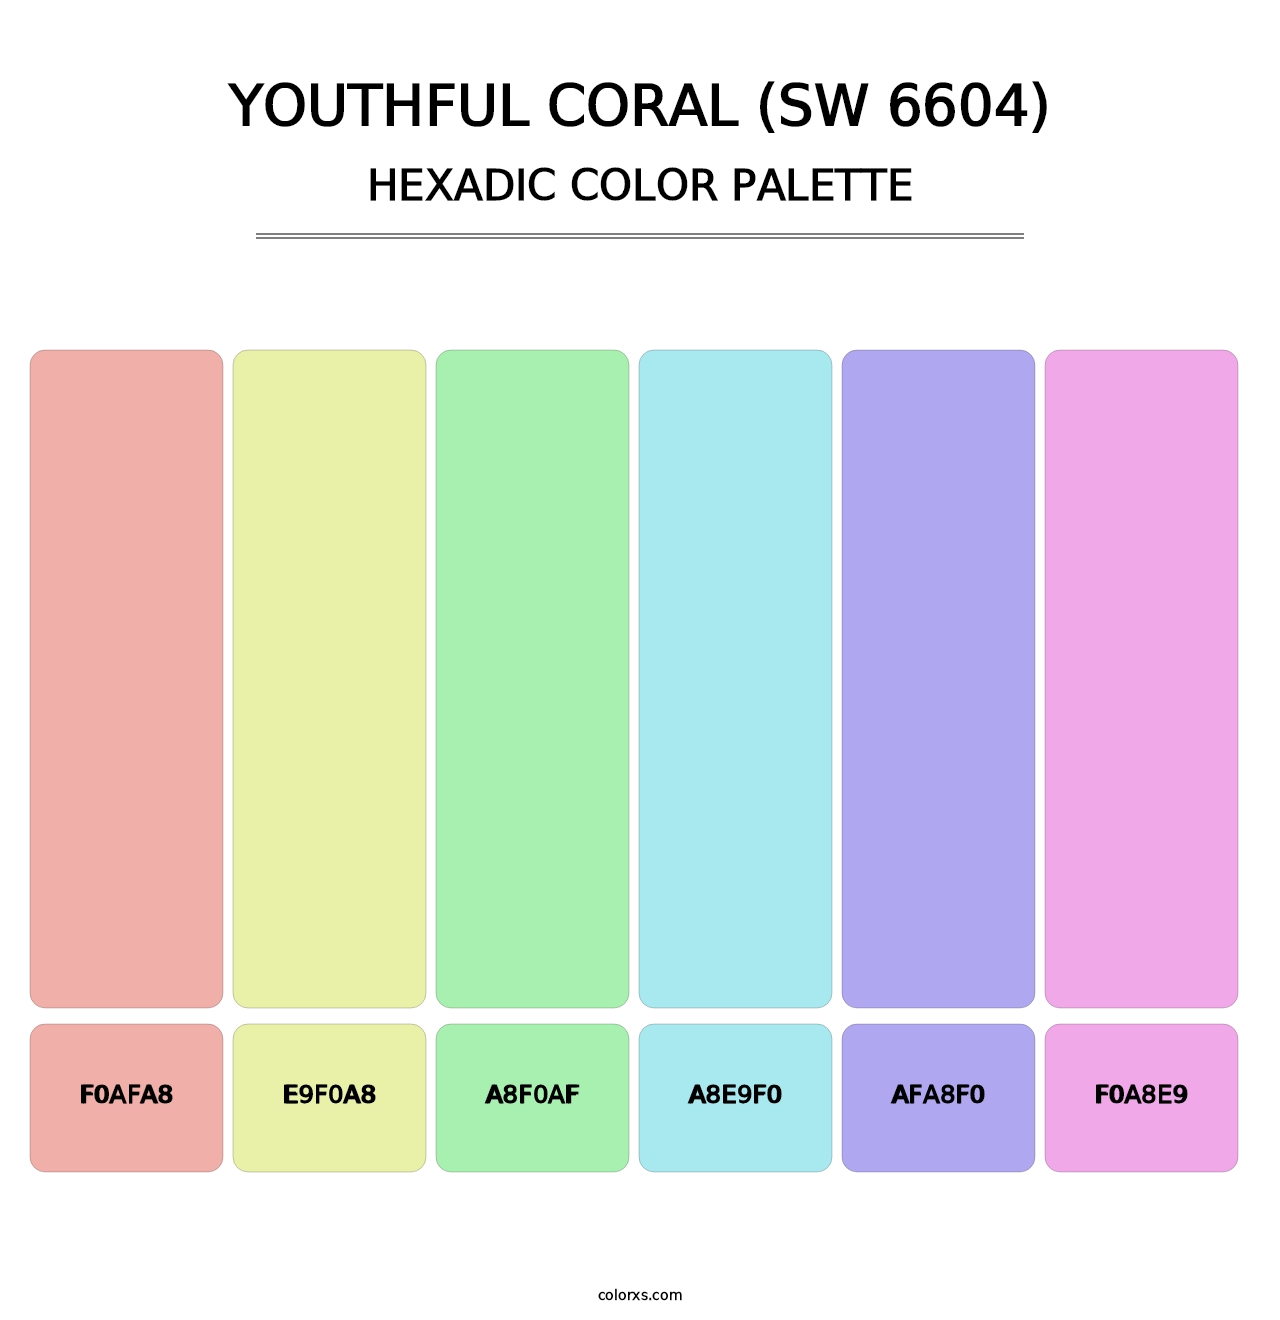 Youthful Coral (SW 6604) - Hexadic Color Palette